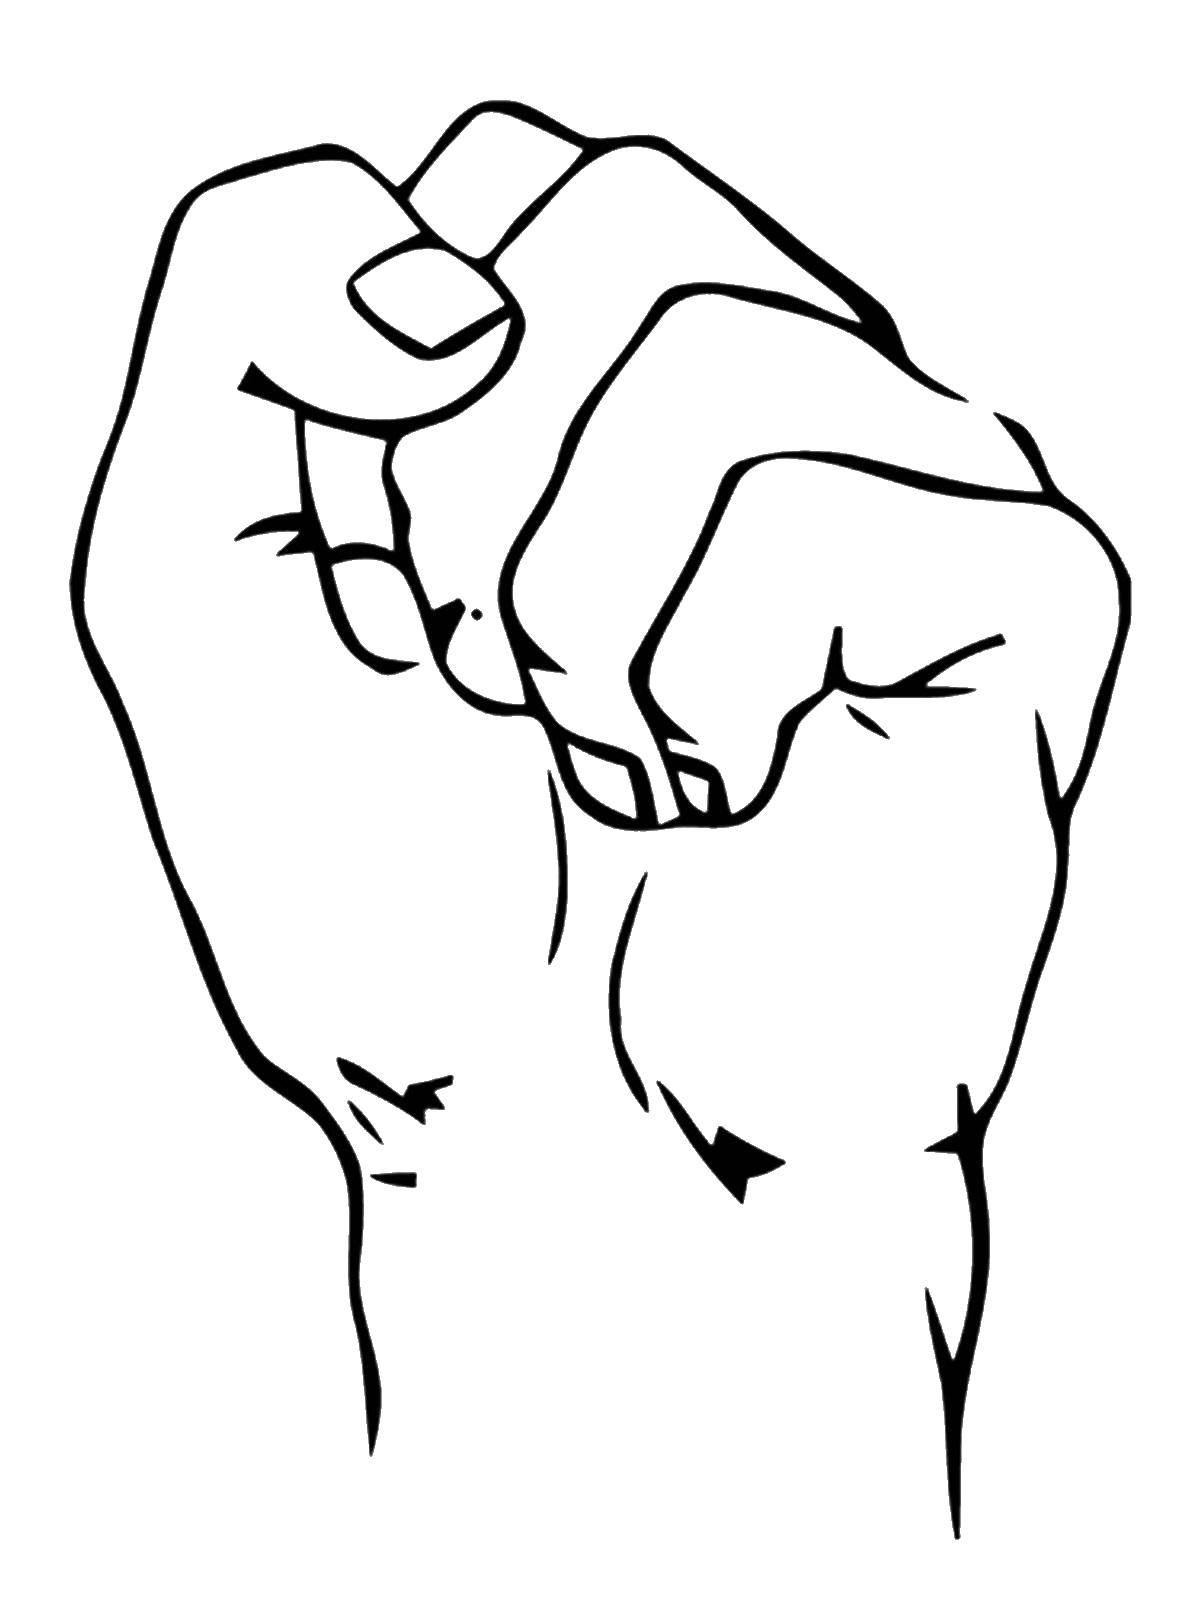 Coloring Fist. Category The structure of the body. Tags:  Hand, brush.